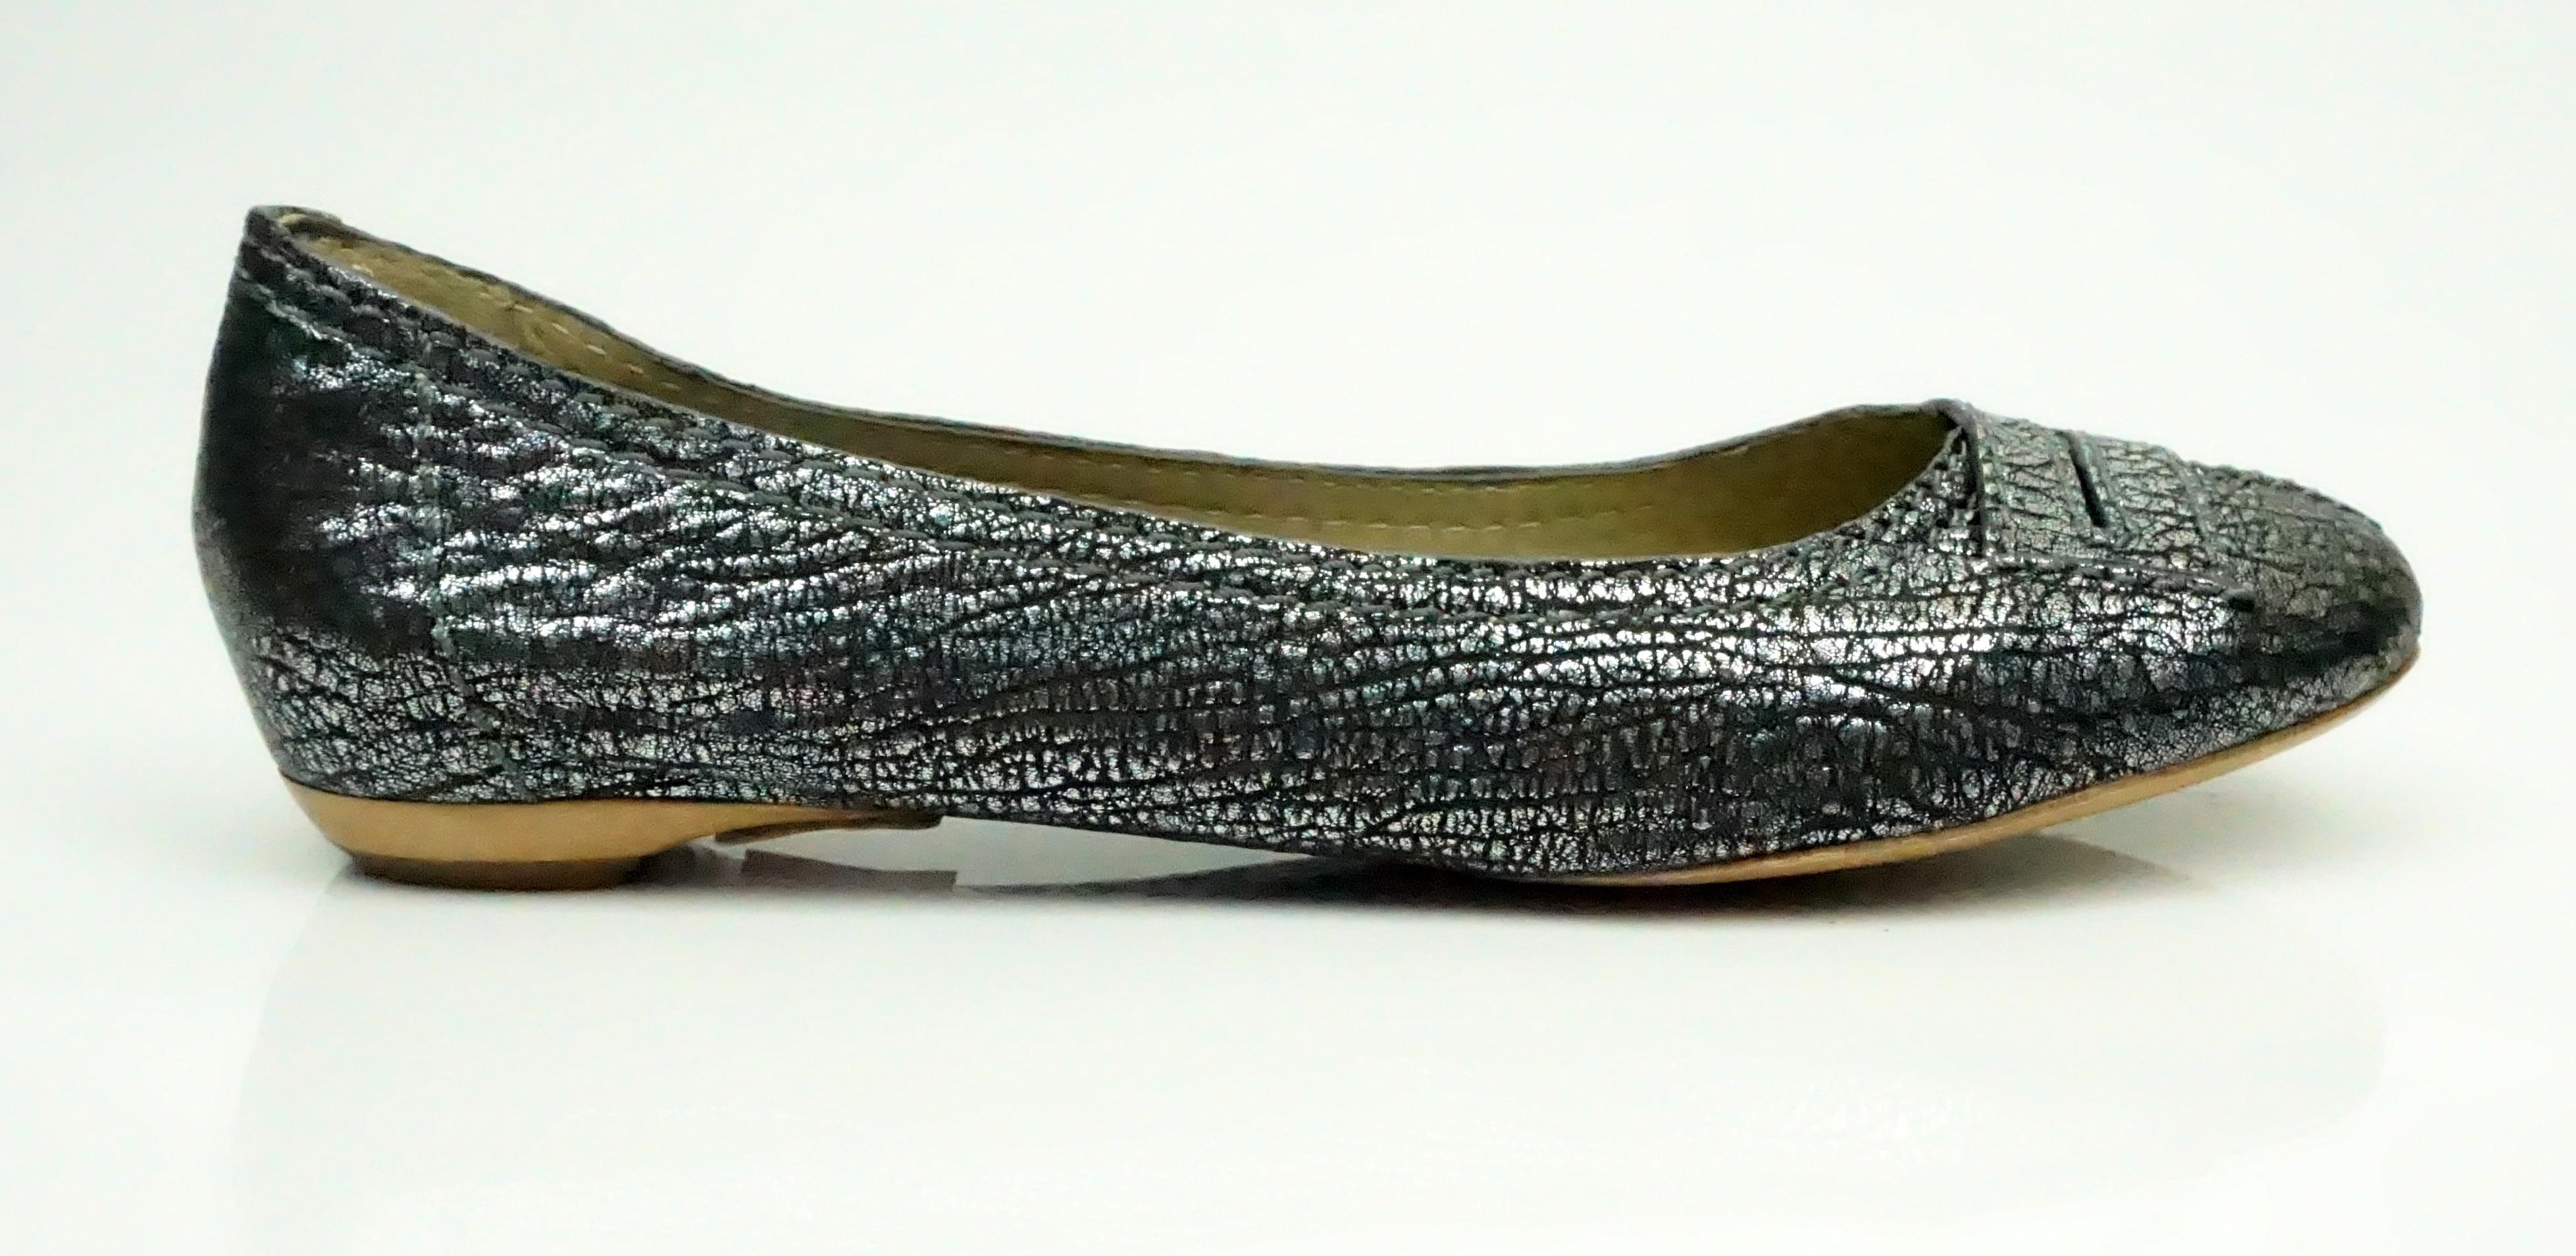 Chloe Gunmetal Metallic Flats - 38.5  These beautiful flats are in excellent condition. They appear to have never been worn before. The fabric of the shoe is thin and has a silver metallic look to it. There is a stitching detail in the front of the